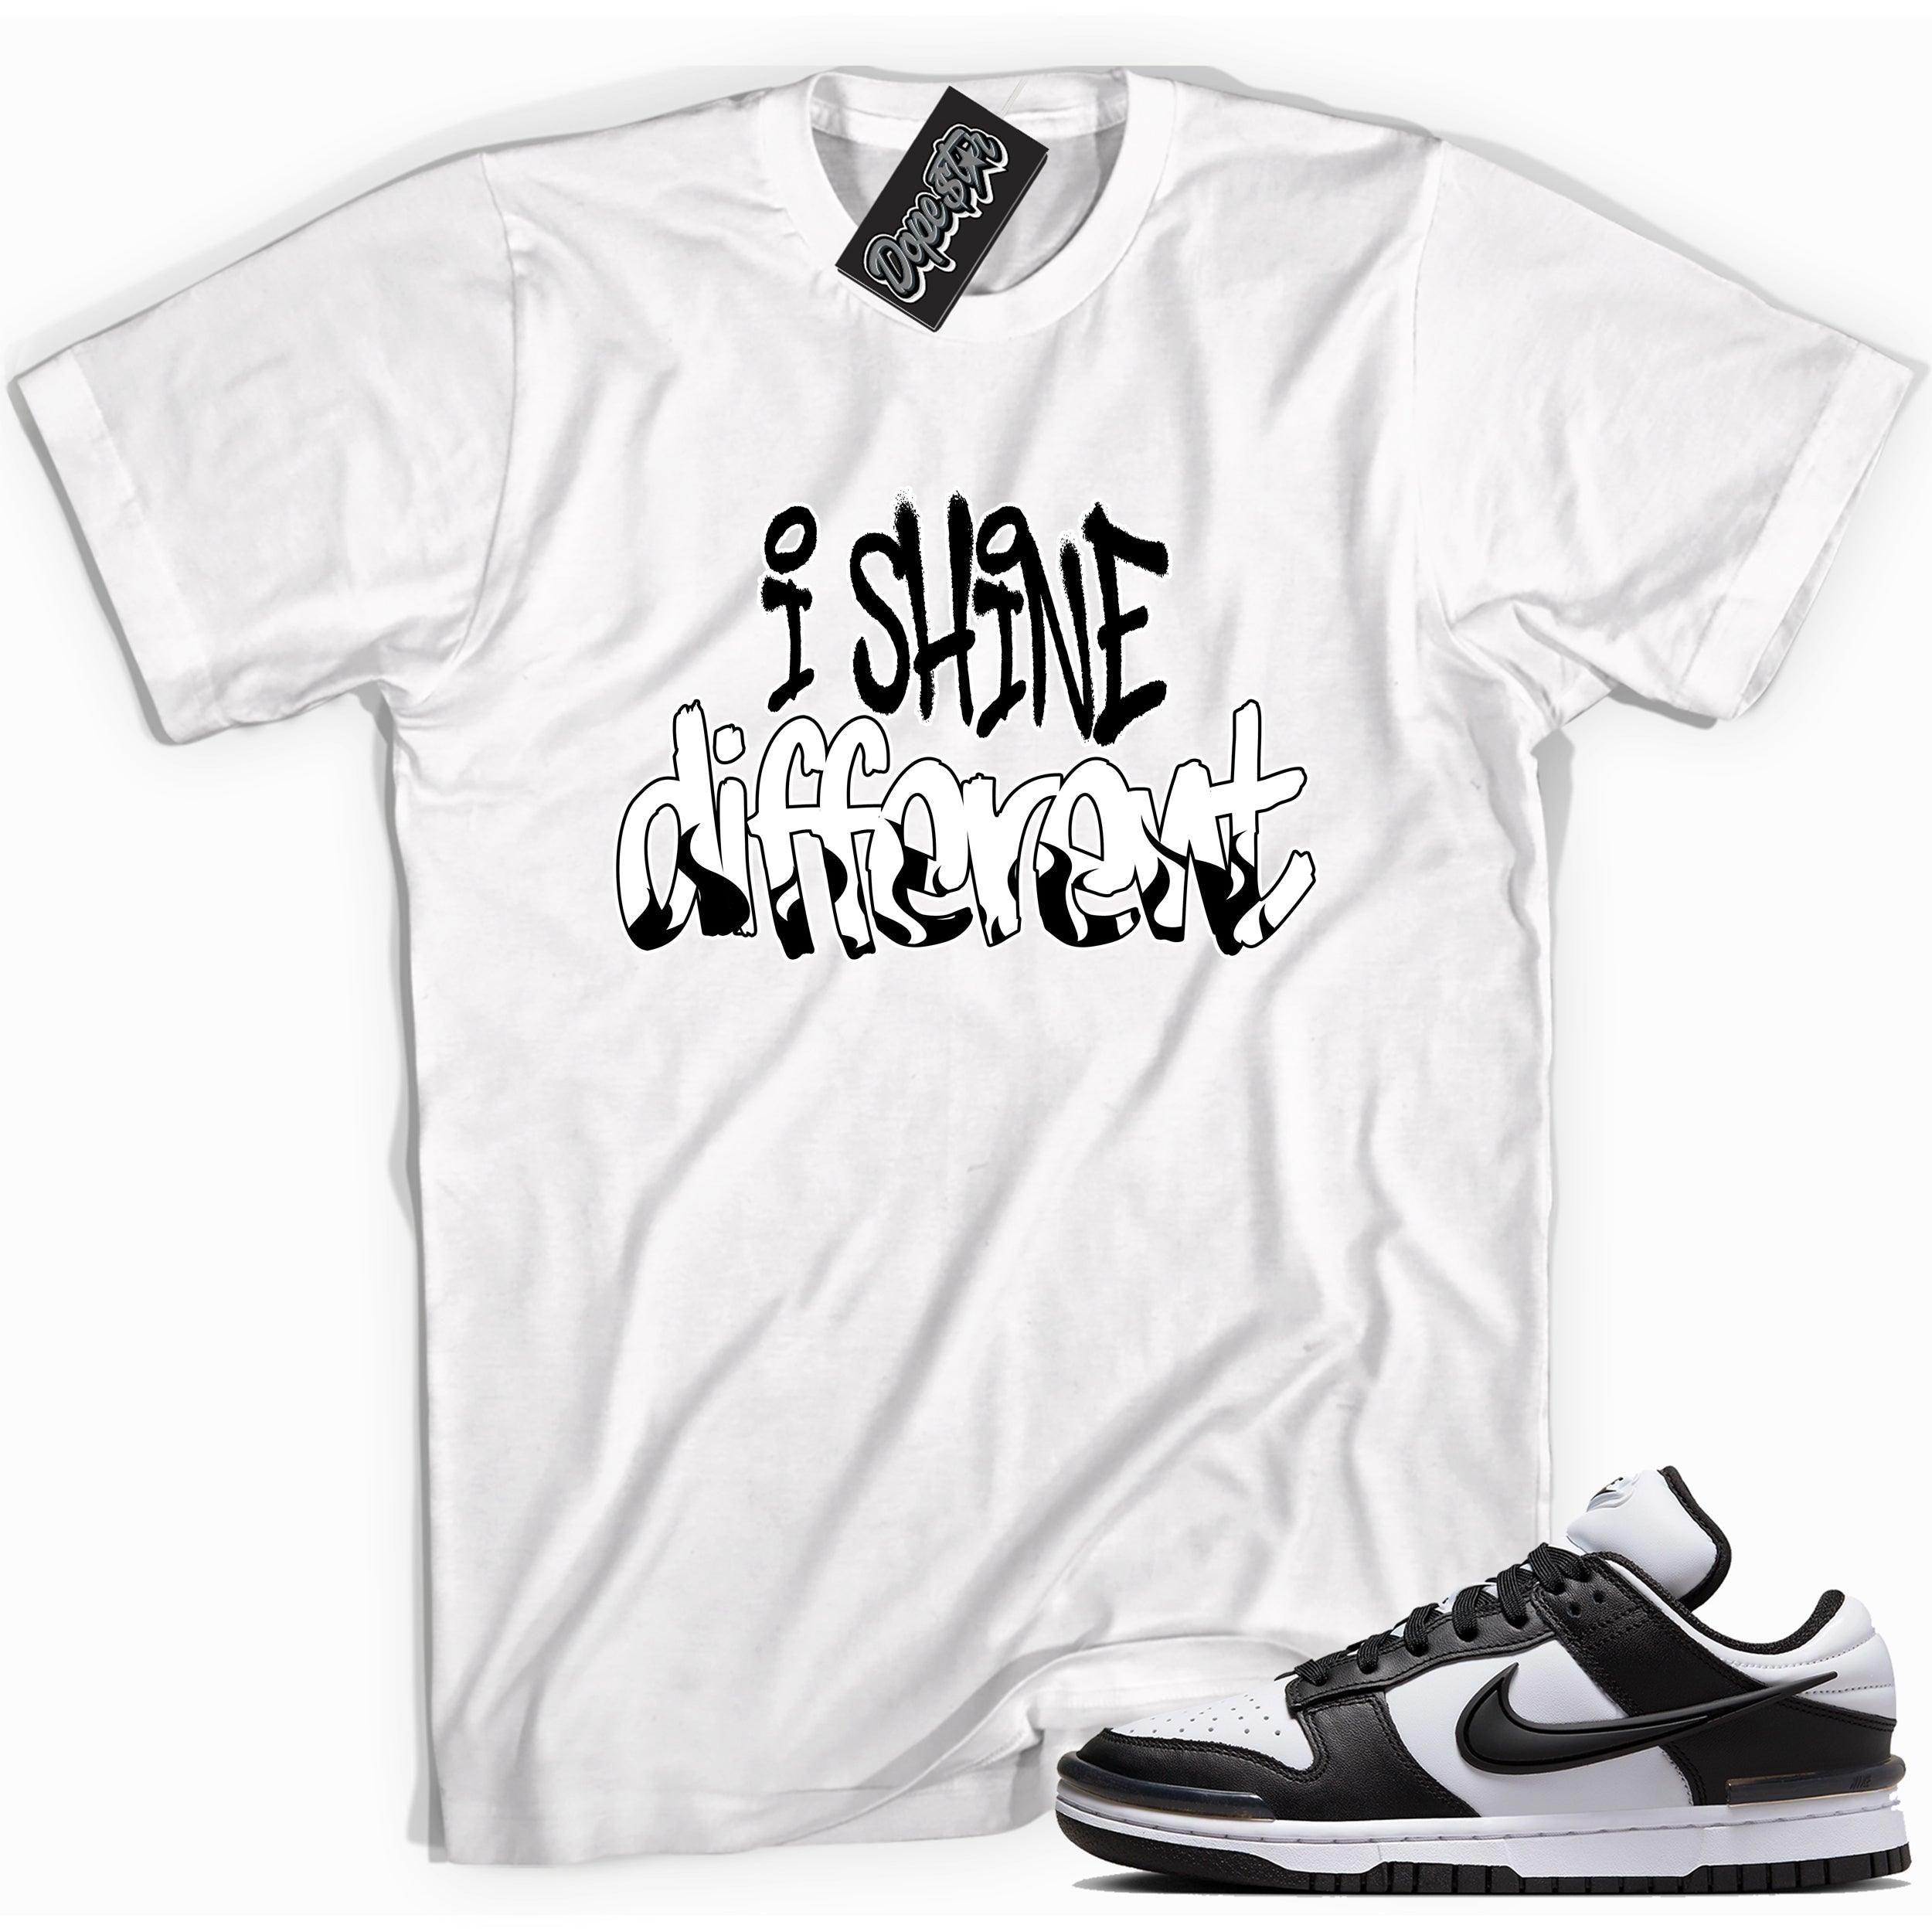 Cool white graphic tee with 'i shine different ' print, that perfectly matches Nike Dunk Low Twist Panda sneakers.